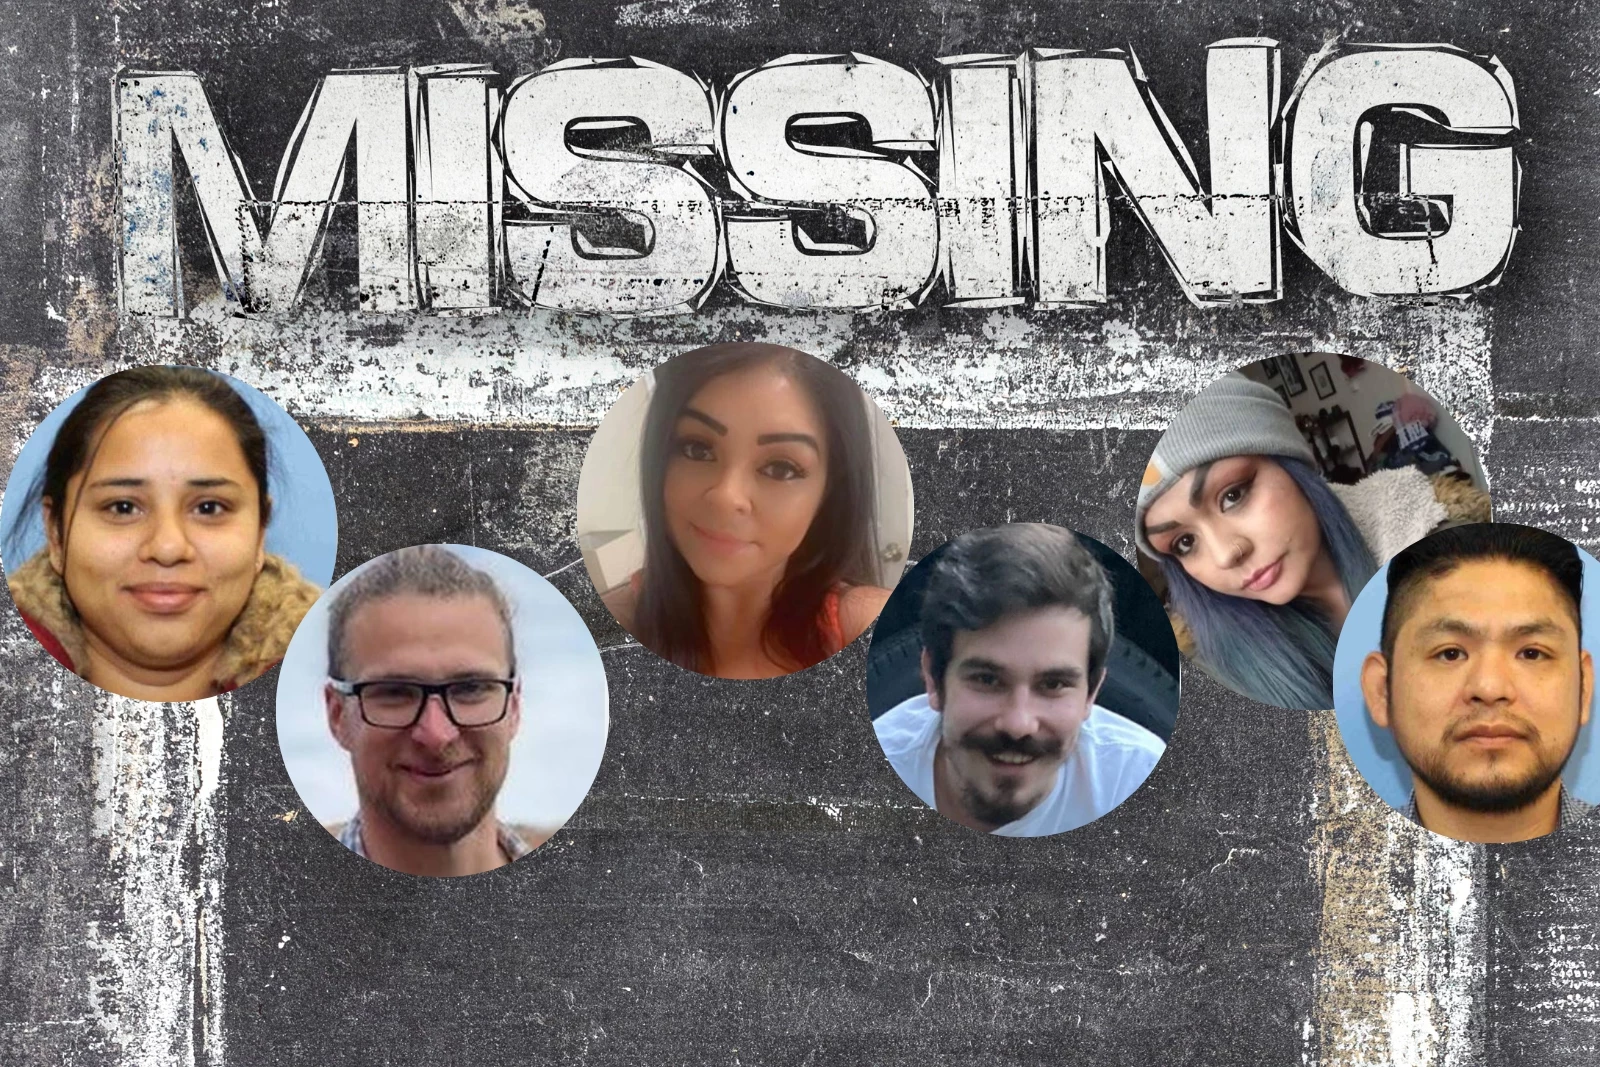 68 Unsolved Missing Persons in Washington. Do You Know Them?